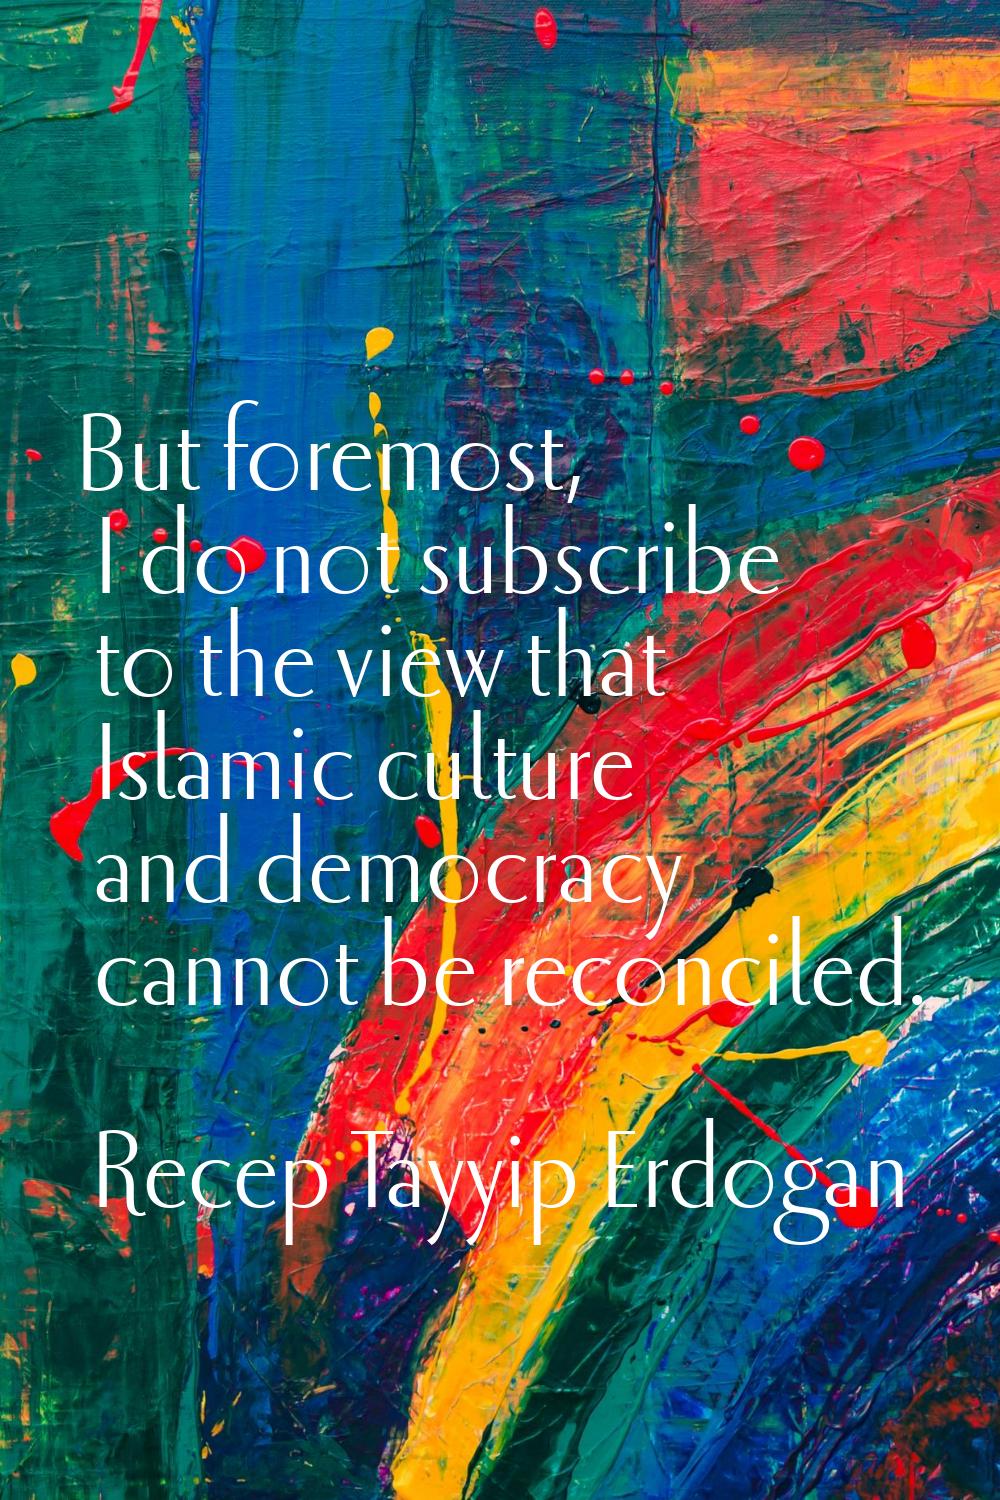 But foremost, I do not subscribe to the view that Islamic culture and democracy cannot be reconcile